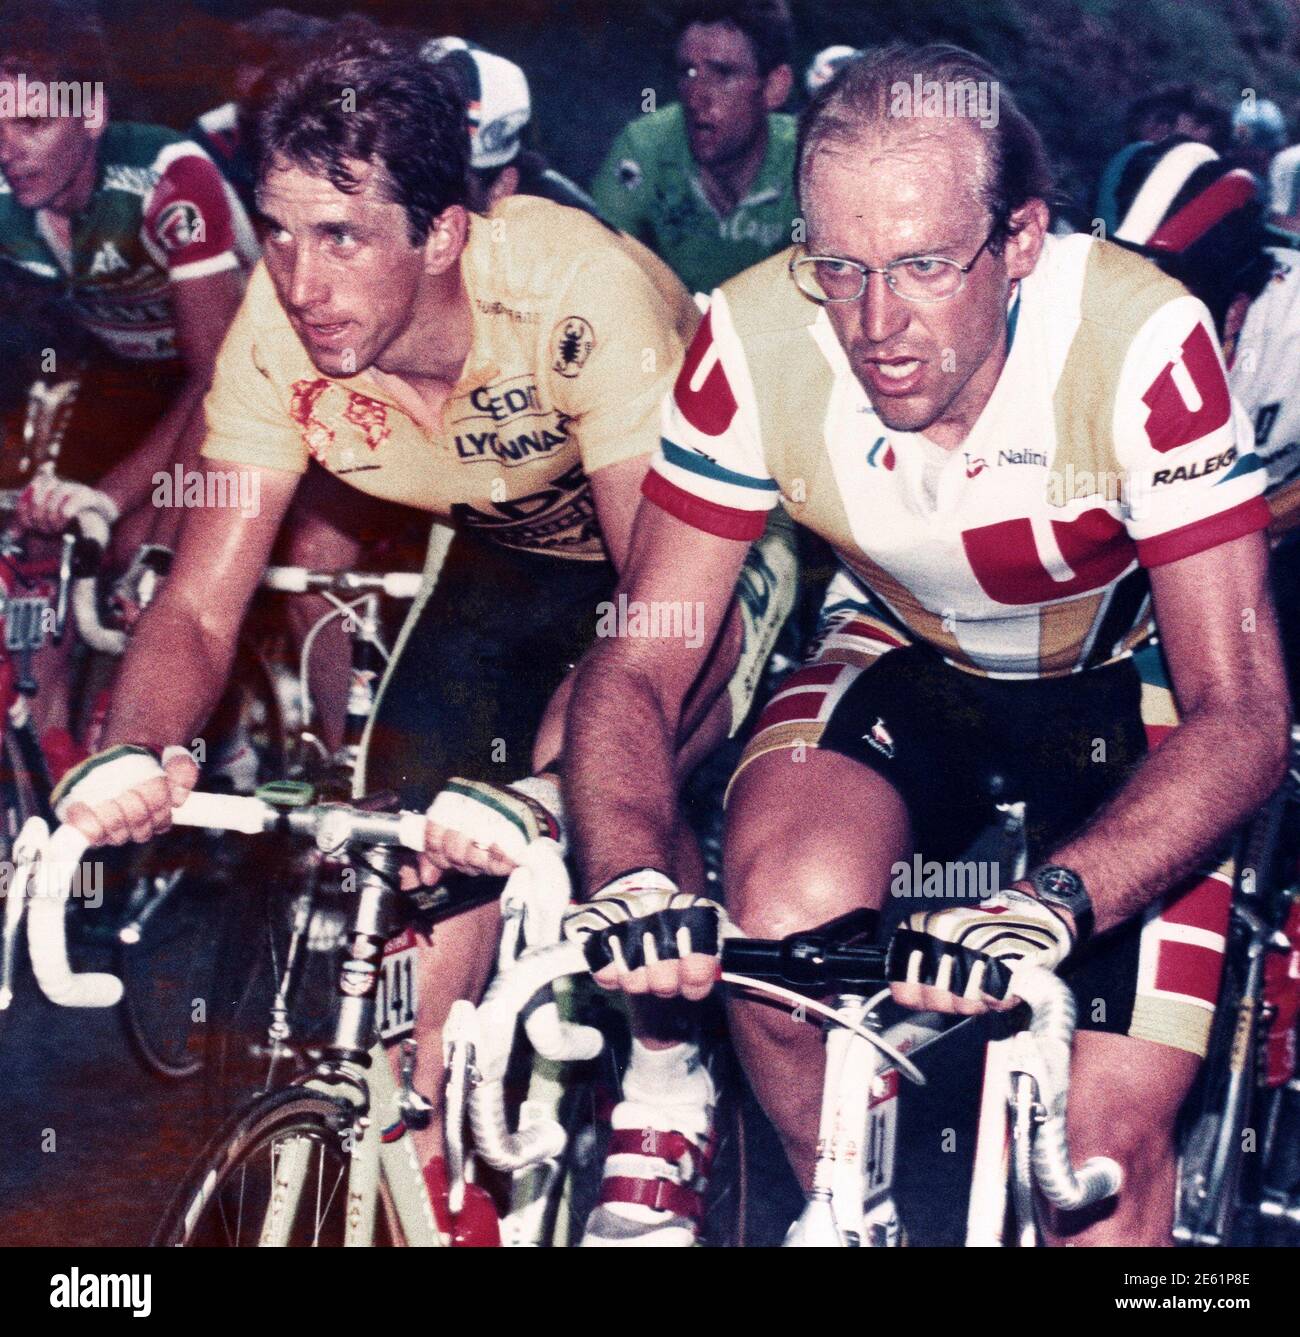 Laurent Fignon of France (R) and Greg LeMond of the U.S. ride side by side  during the 9th stage of the Tour de France cycling race between Pau and  Cauterets in this